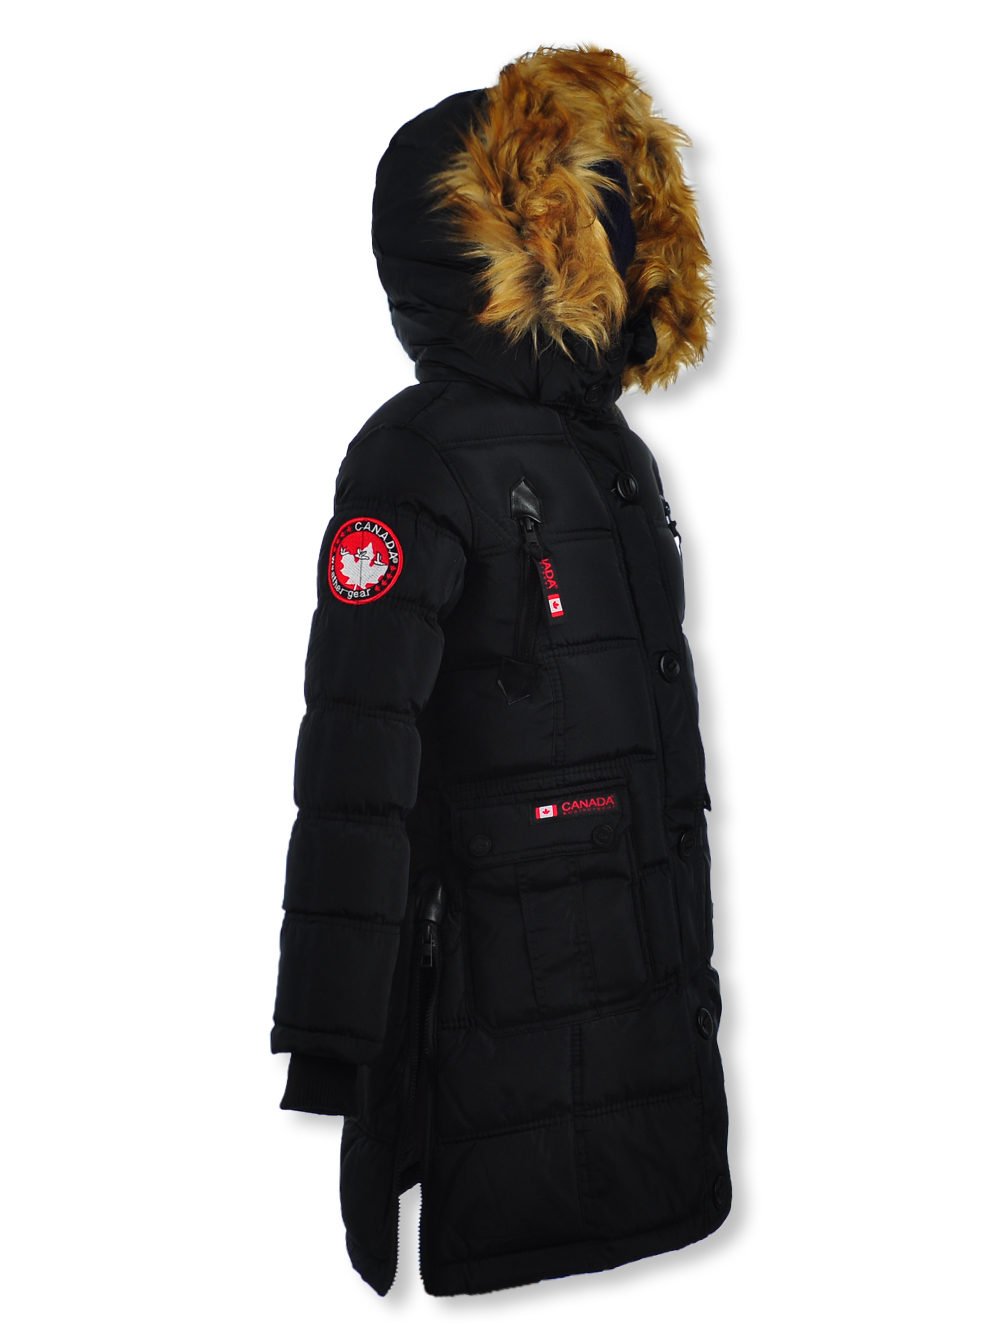 Canada Weather Gear Girls' Faux-Fur Long Parka - black/natural, 2t (Toddler) - image 3 of 3